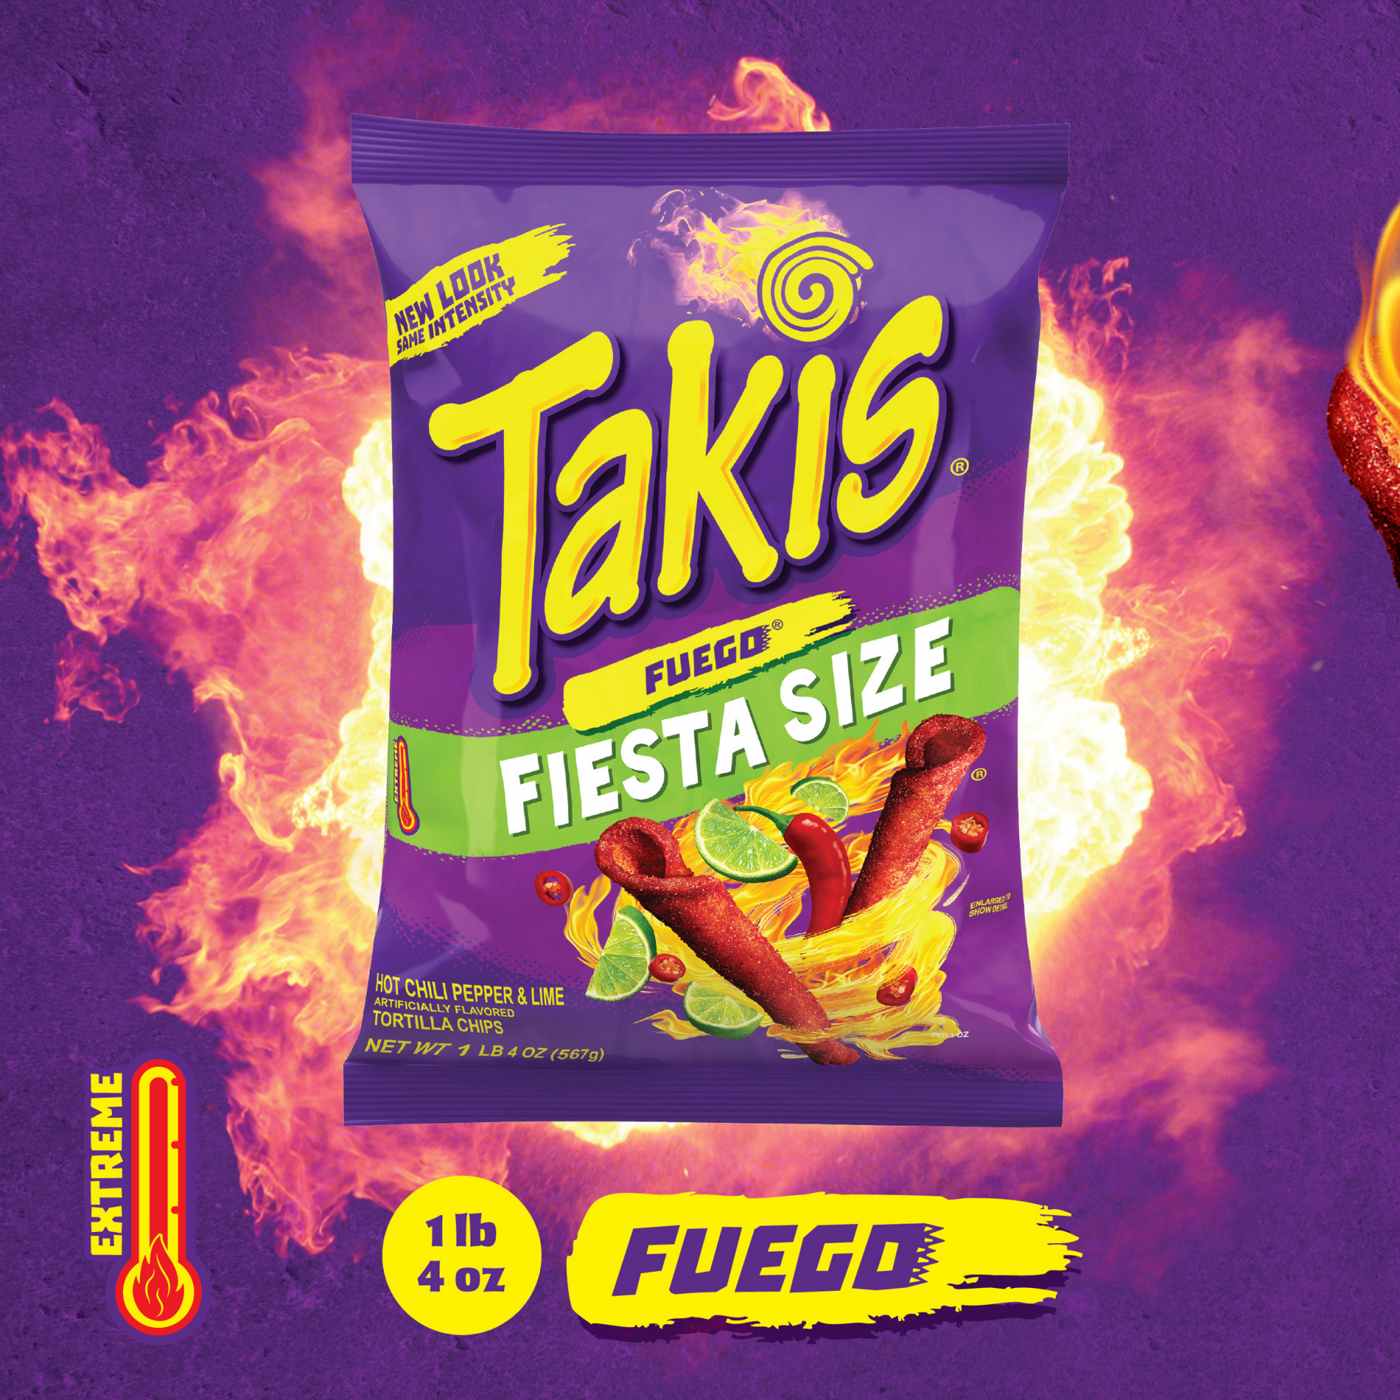 Takis Fuego Hot Chili Pepper & Lime Rolled Tortilla Chips Fiesta Size; image 8 of 8